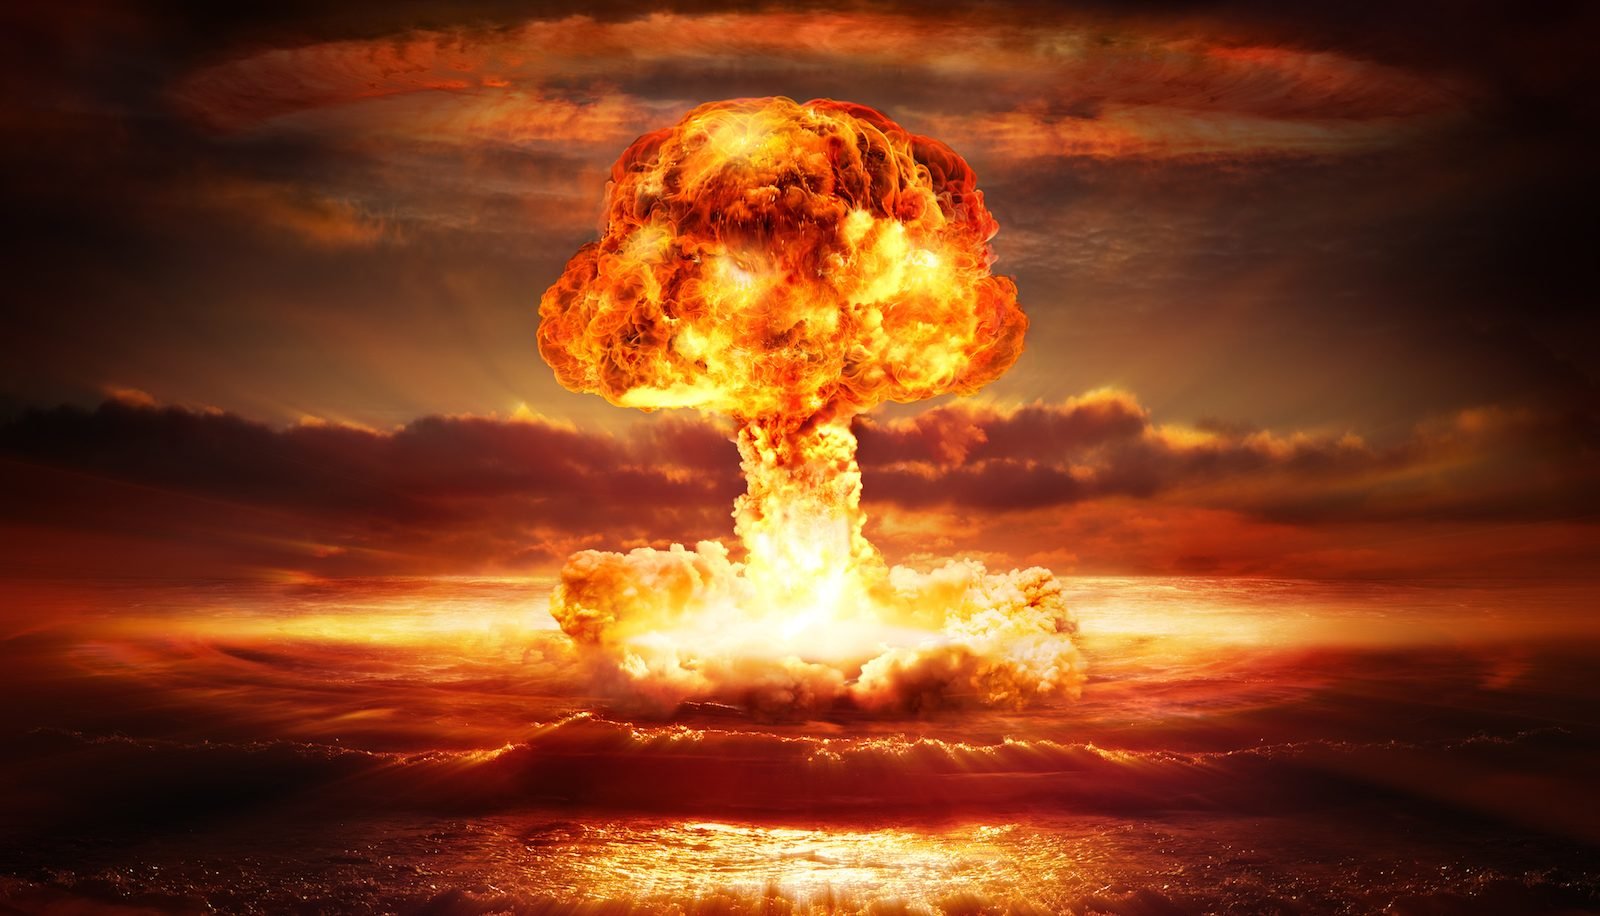 19 Interesting Facts about the Atomic Bomb You Might Not Know